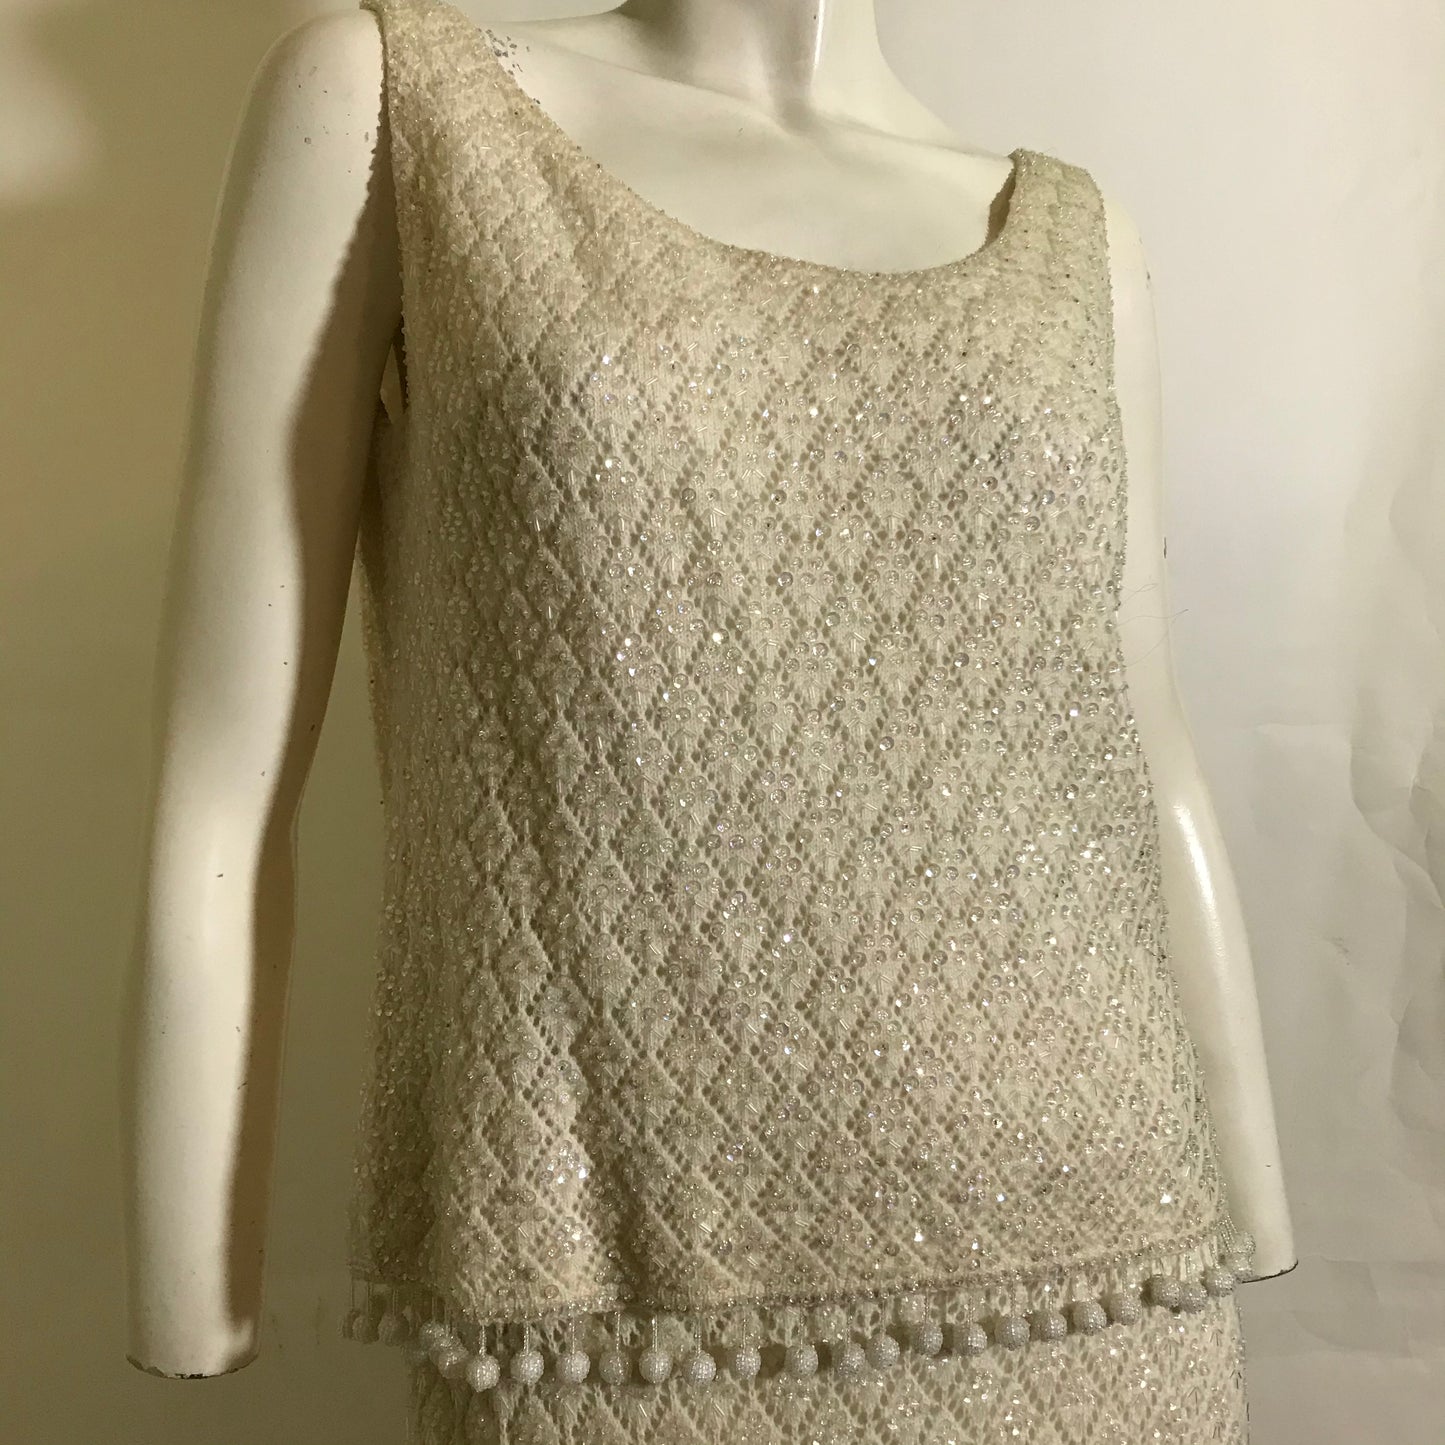 Creamy Knit Wool Beaded and Sequined 2 Pc Dress with Beaded Pom Pom Fringe circa 1960s